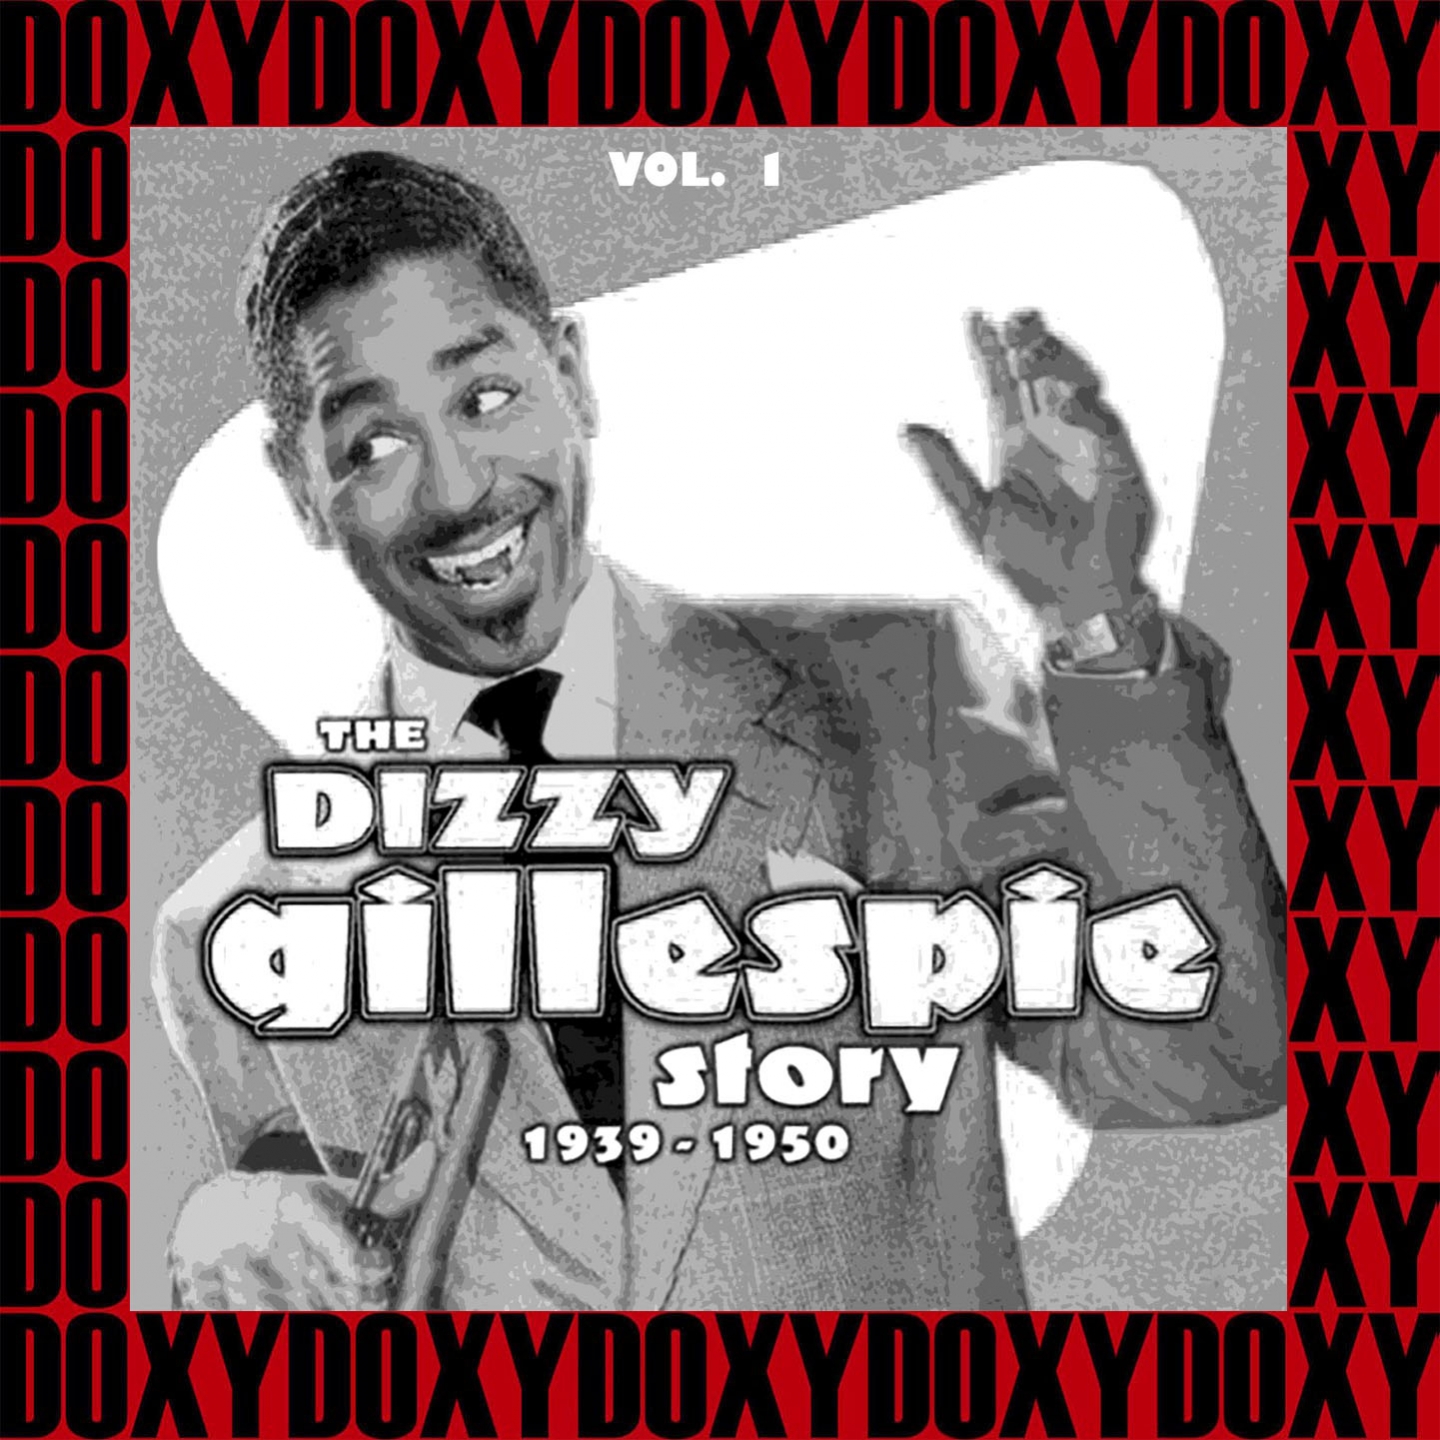 The Dizzy Gillespie Story 1939-1950, Vol. 1 (Hd Remastered Edition, Doxy Collection)